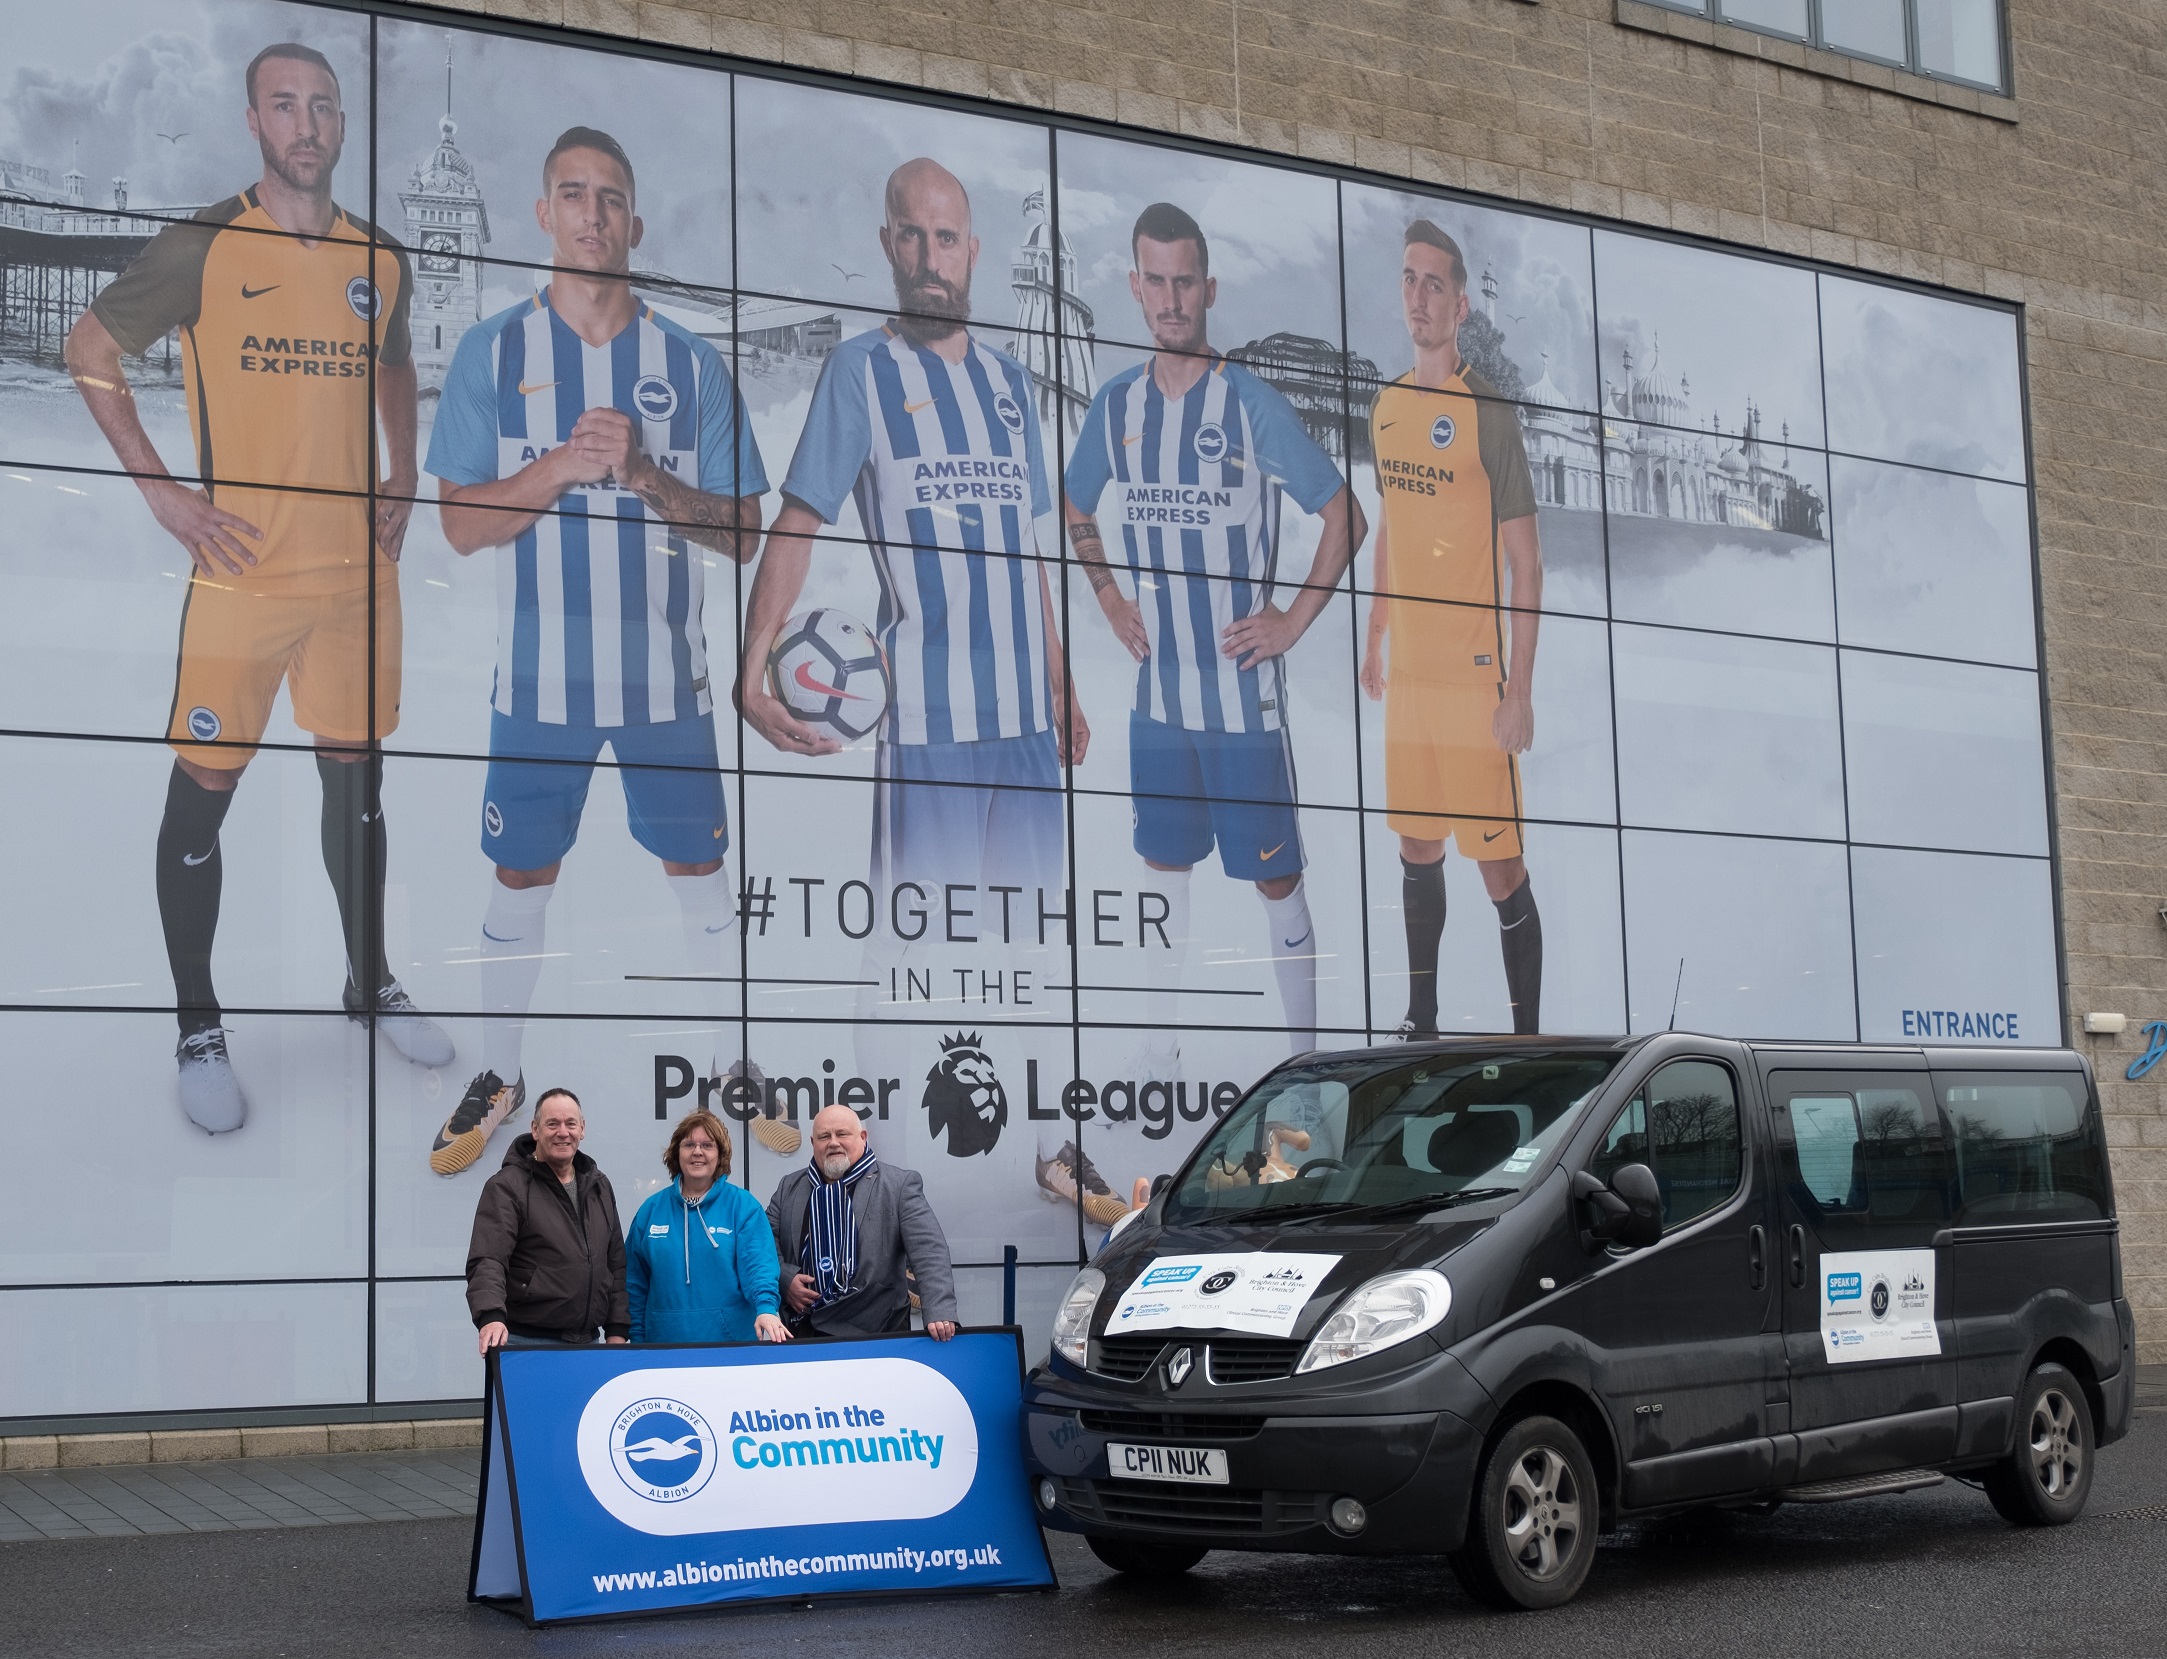 Albion in the Community clocks up the miles to deliver vital cancer messages thanks to support from City Cabs